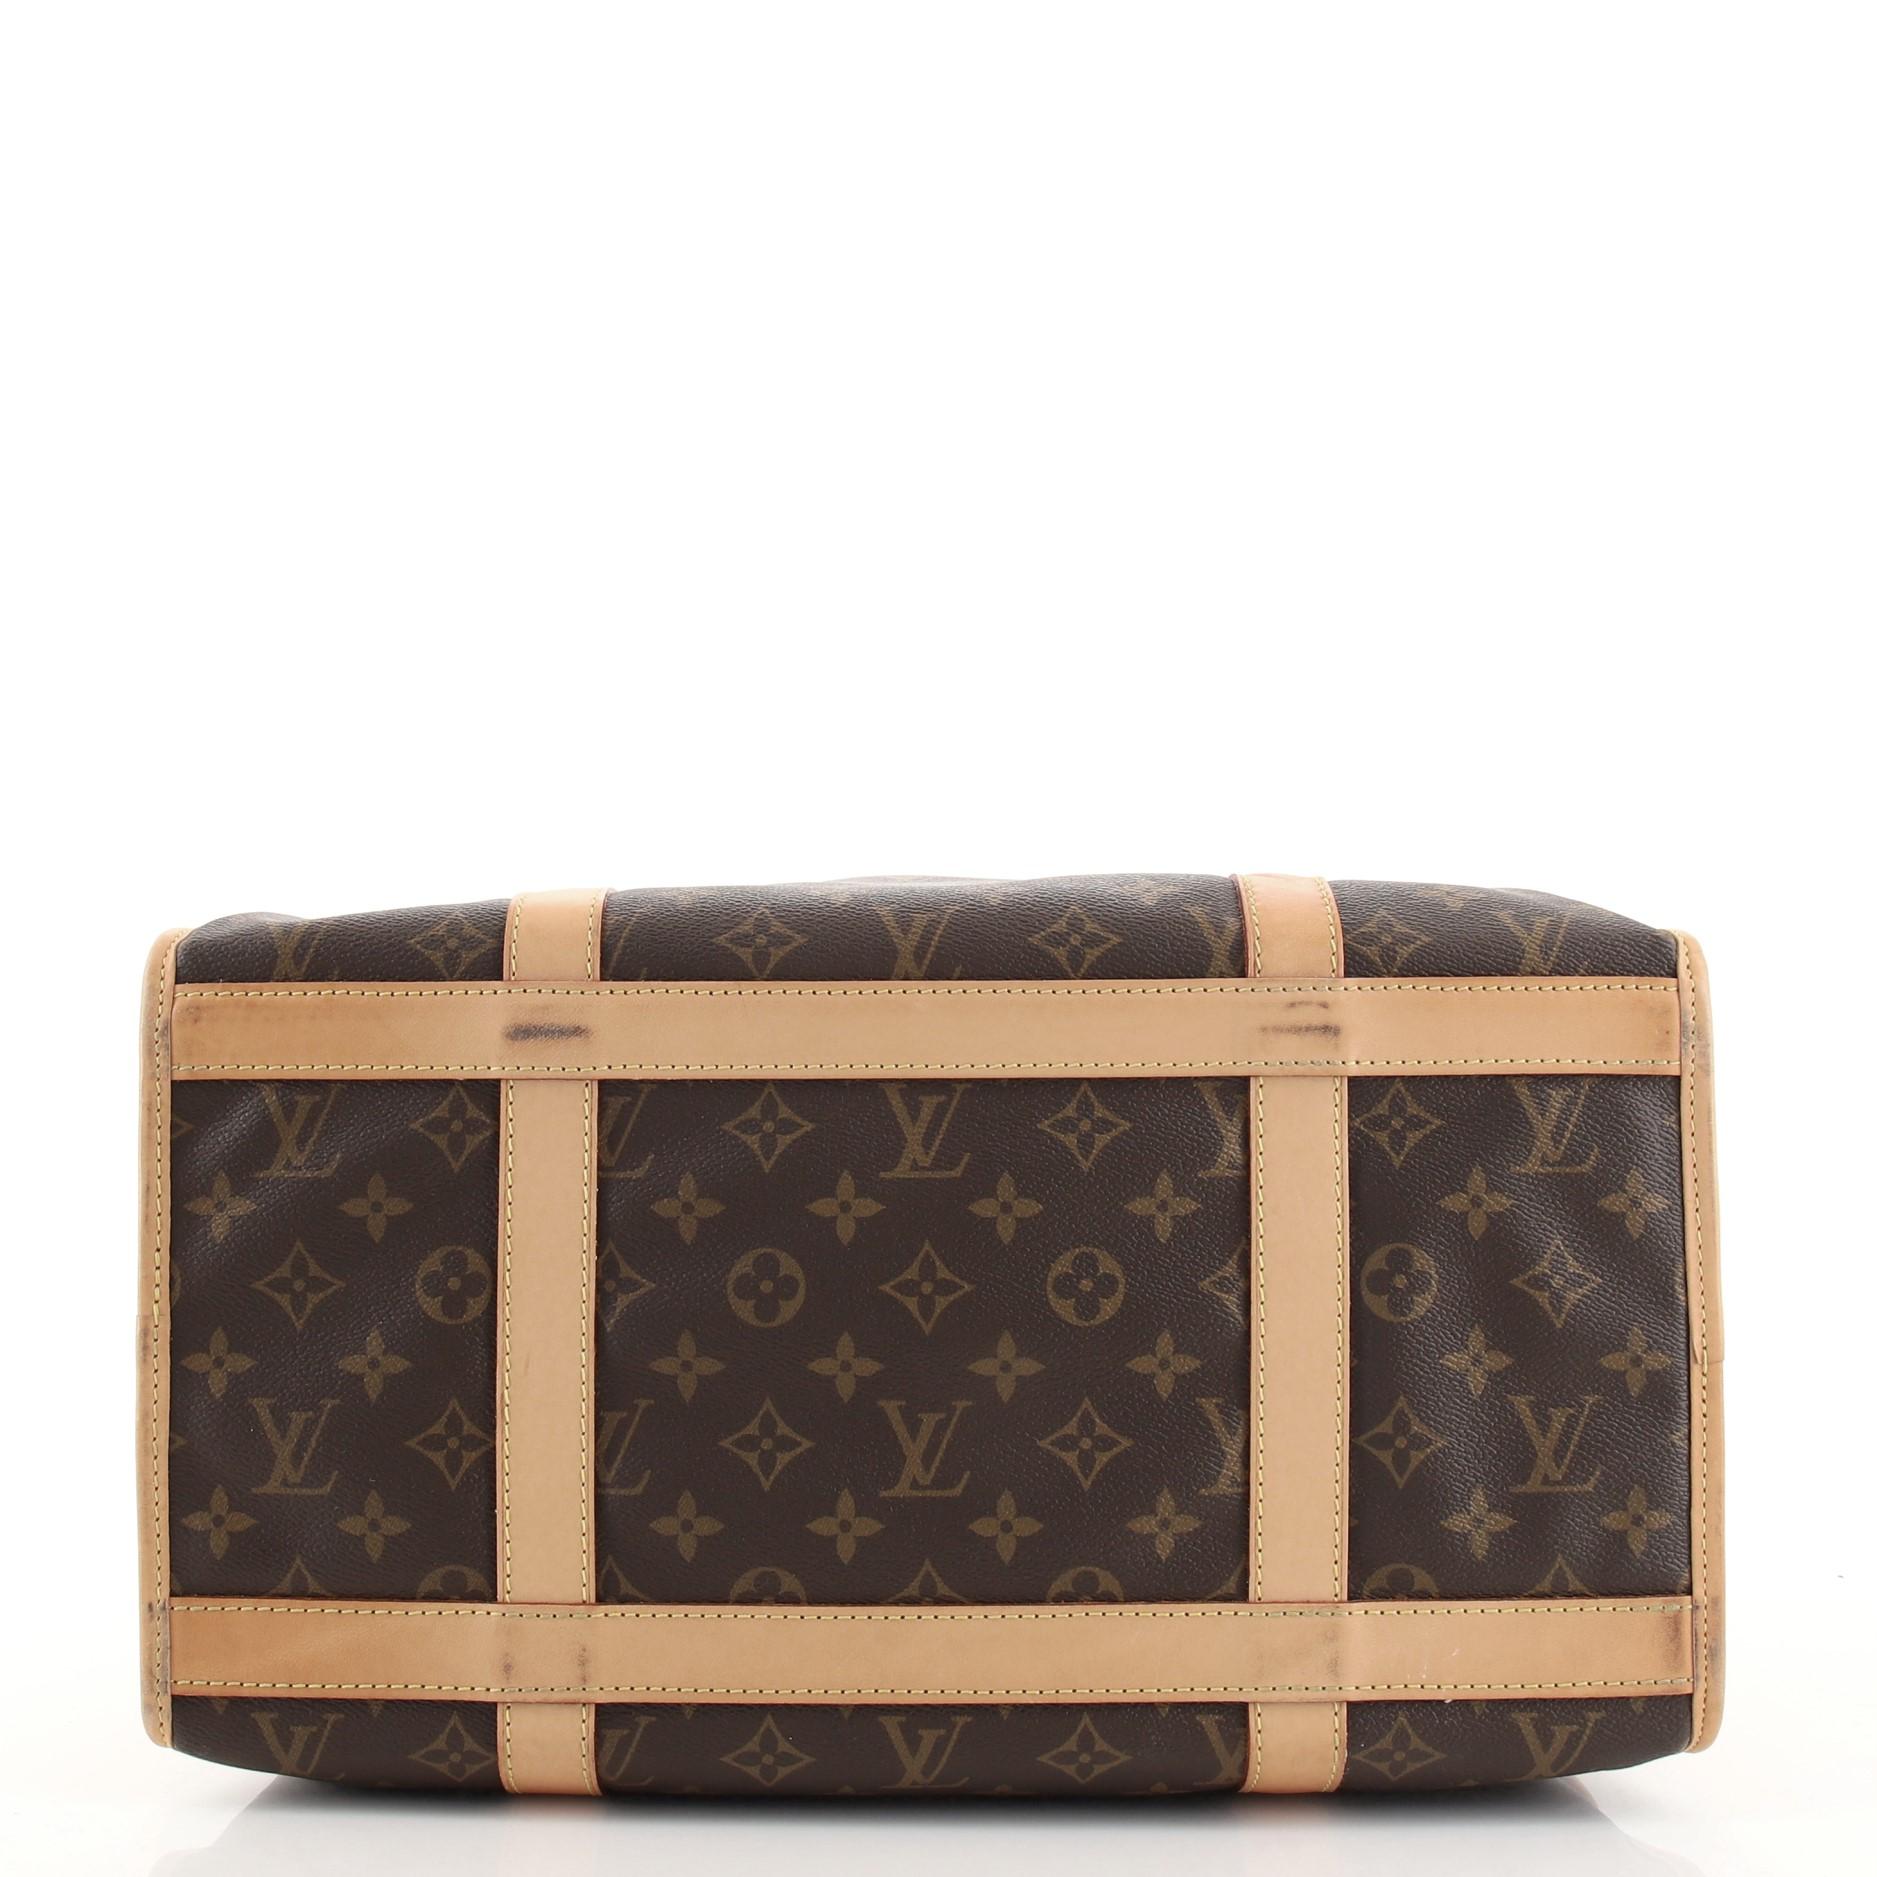 louis vuitton for dogs